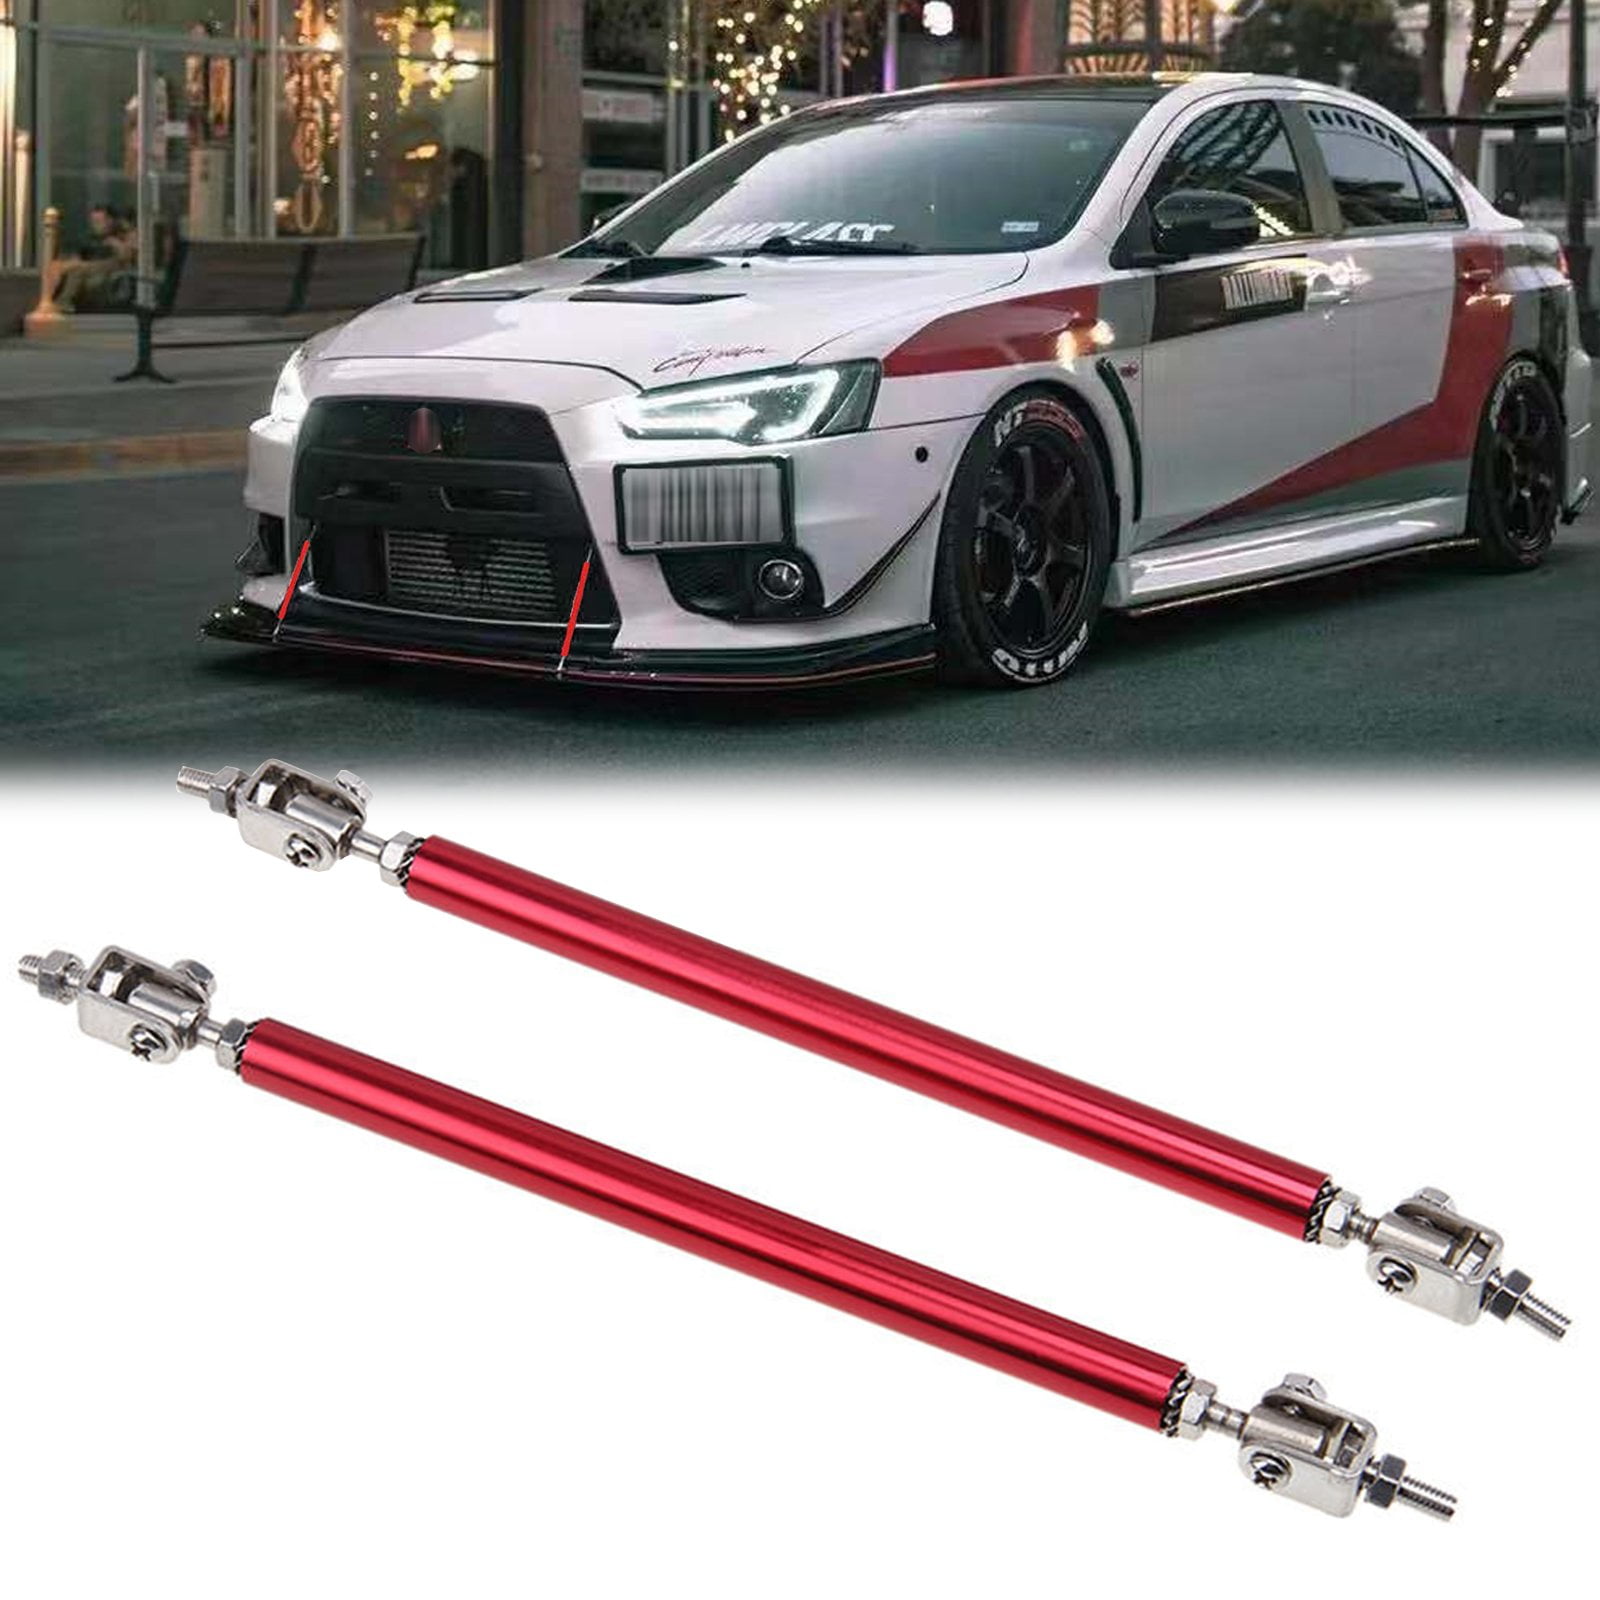 D DOLITY 2pc Adjustable 7.9 Front Bumper Lip Splitter Diffuser Strut Rod Tie Bars Support Rod Fits for Most Vehicles Silver 